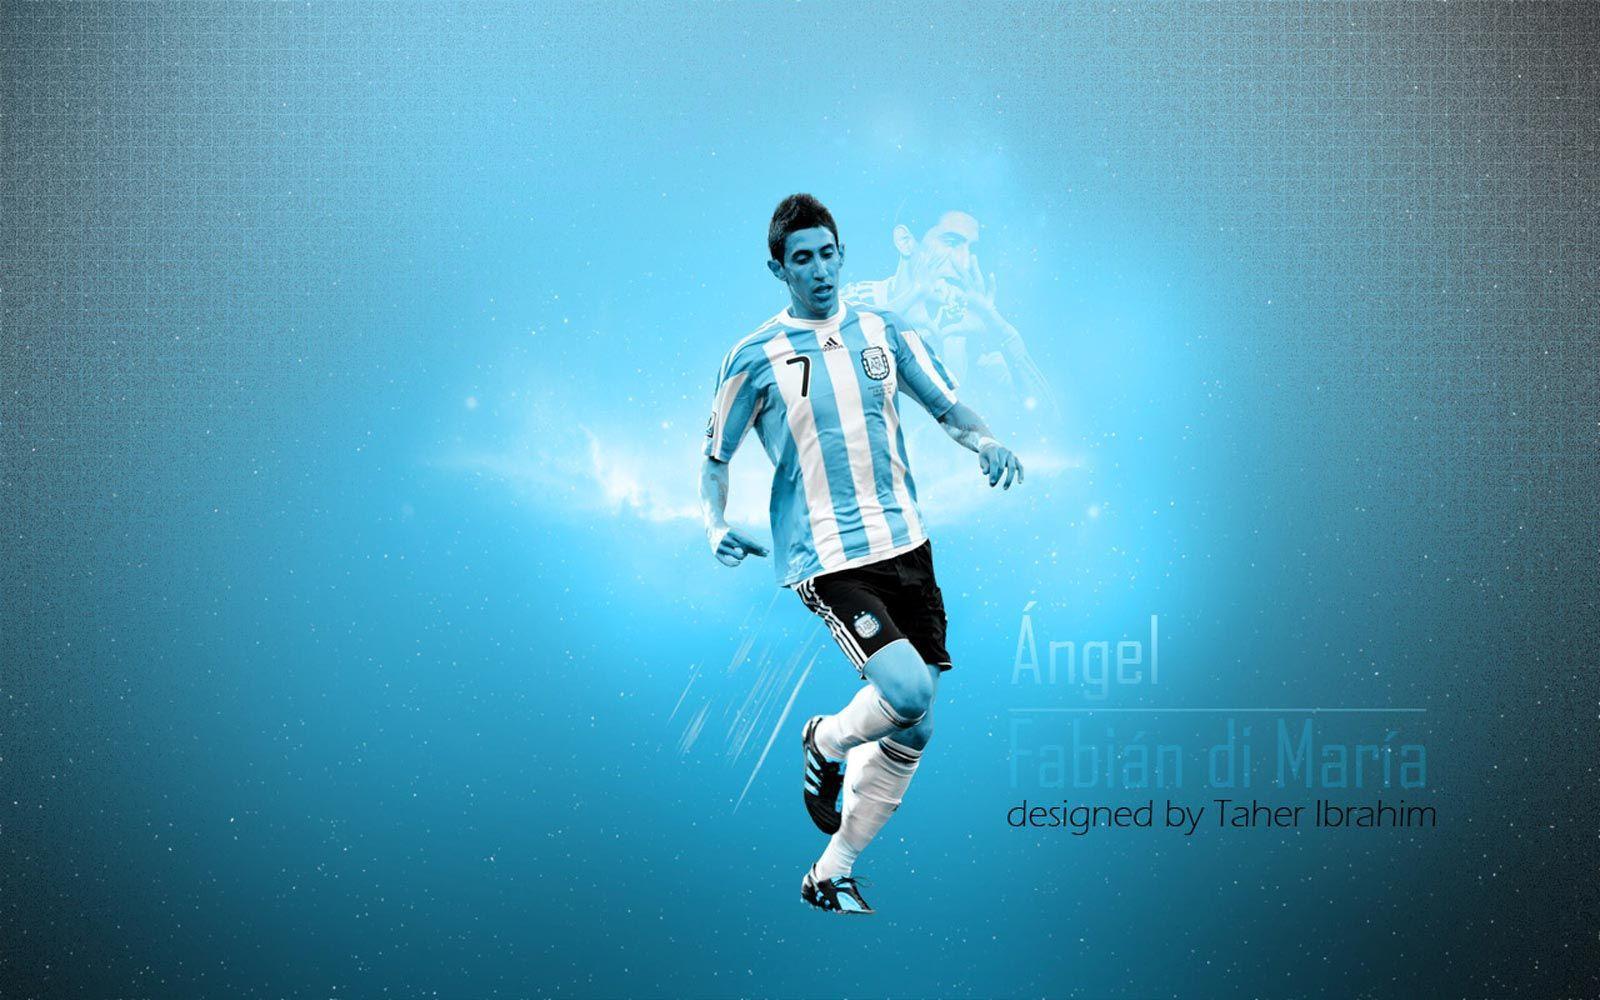 image about Angel Di Maria Wallpaper